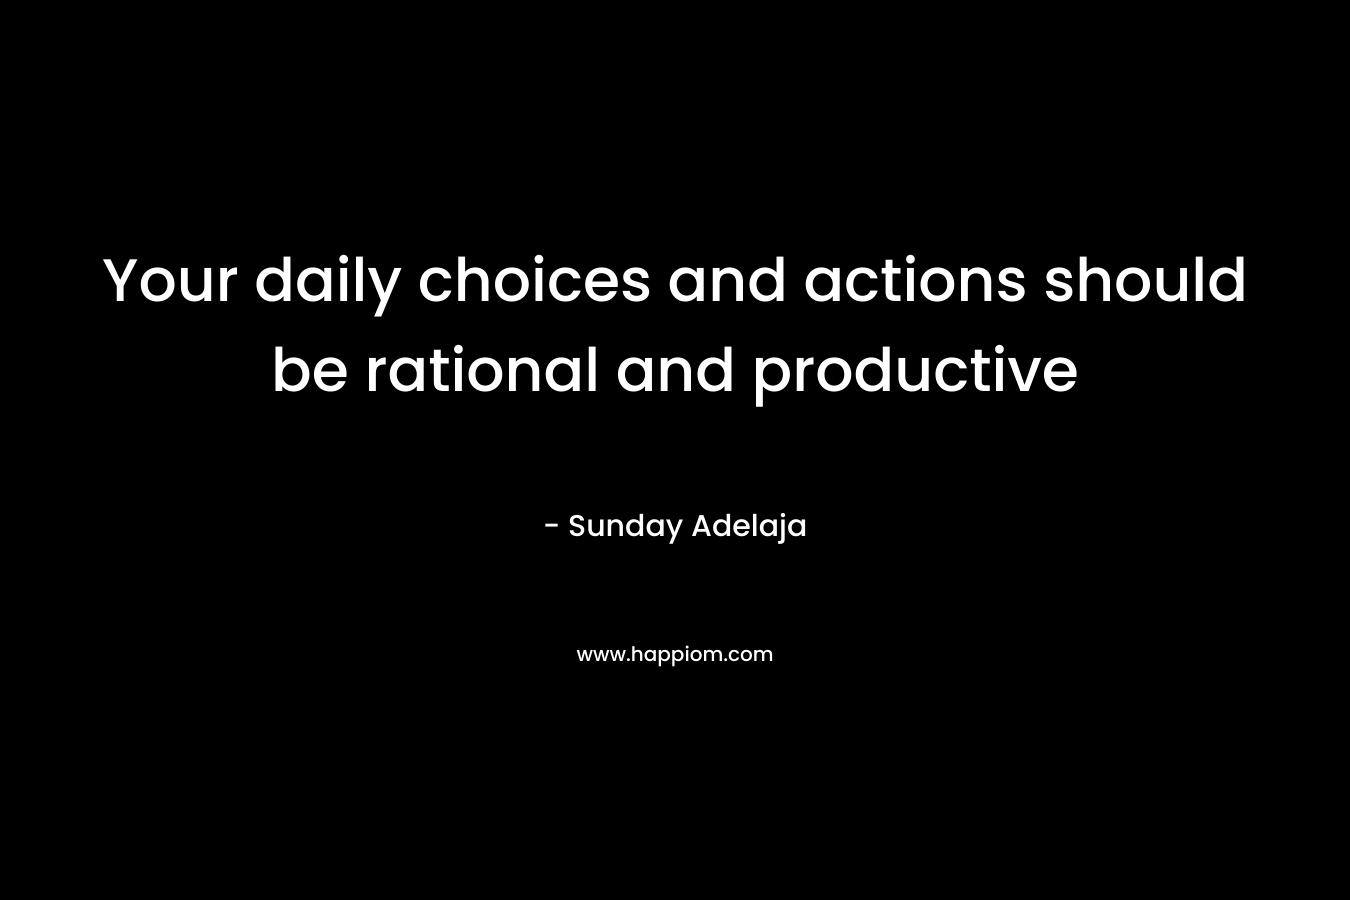 Your daily choices and actions should be rational and productive